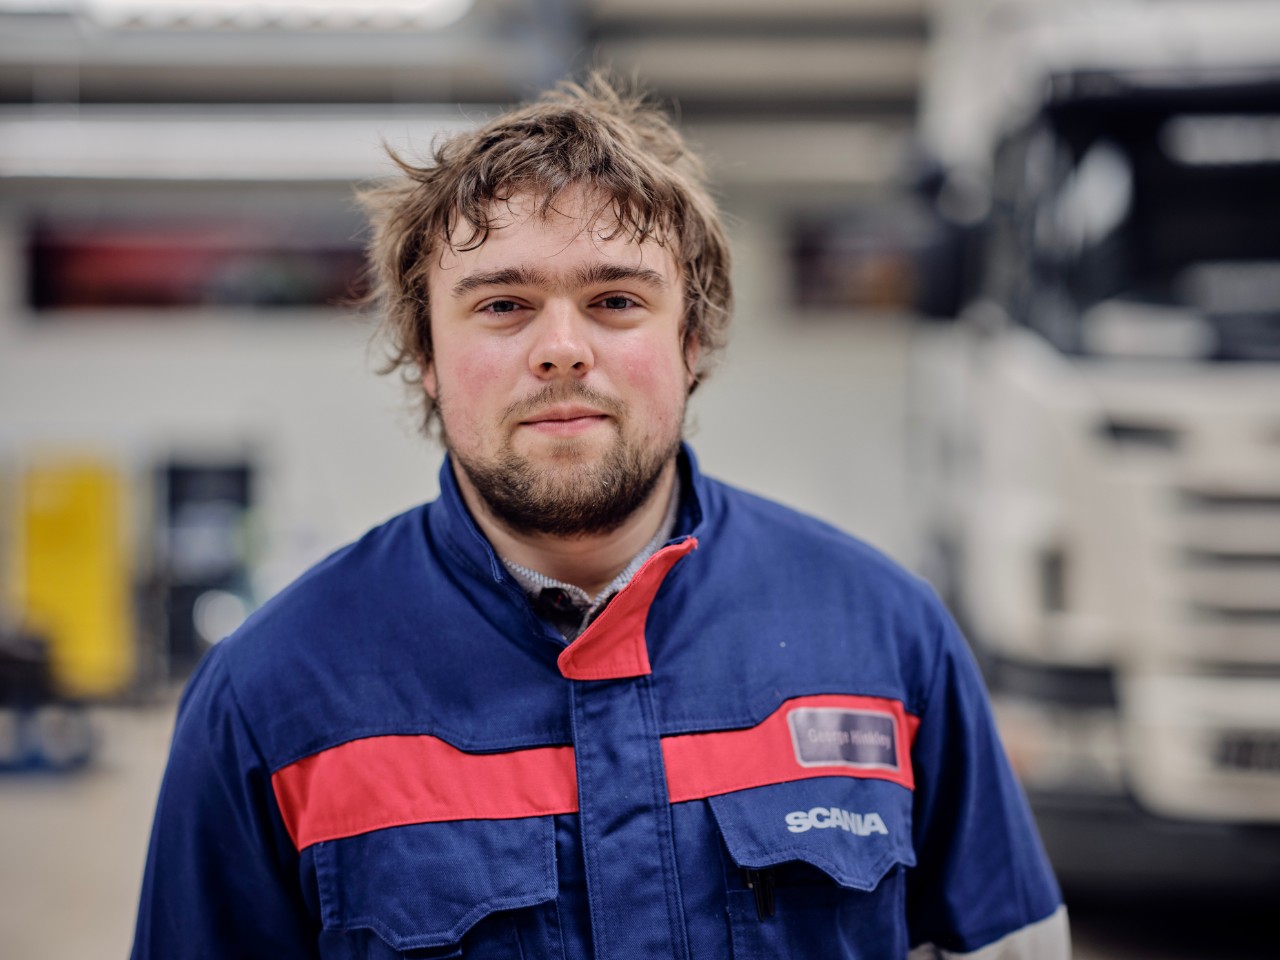 Apprentice of the Year, Geroge standing in Scania workshop